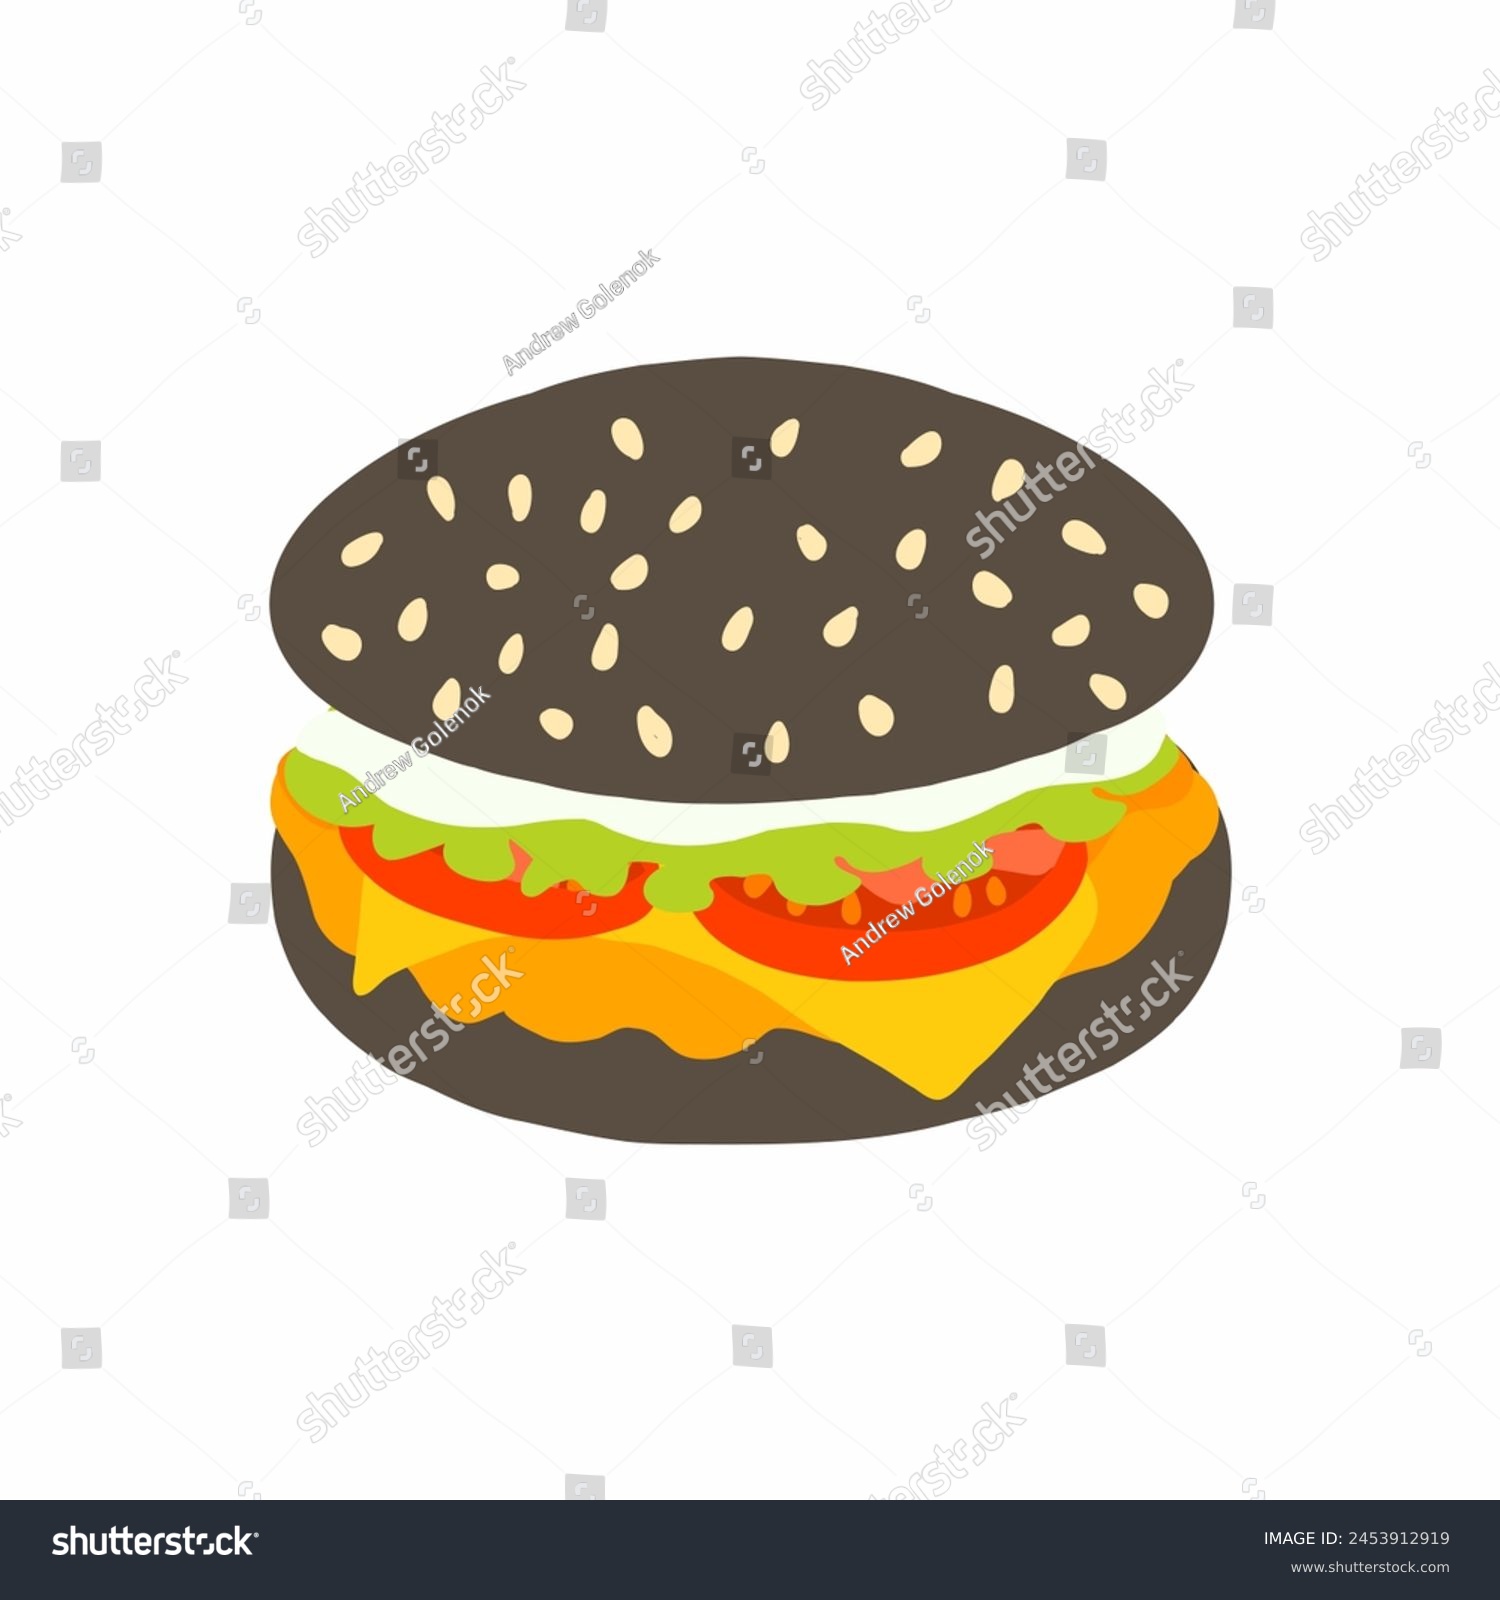 SVG of Big burger with black bun, chicken cutlet, fresh tomato, salad leaf, cheese and mayo sauce icon in cartoon flat style. Vector illustration isolated on white background. For menu, poster, restaurant. svg